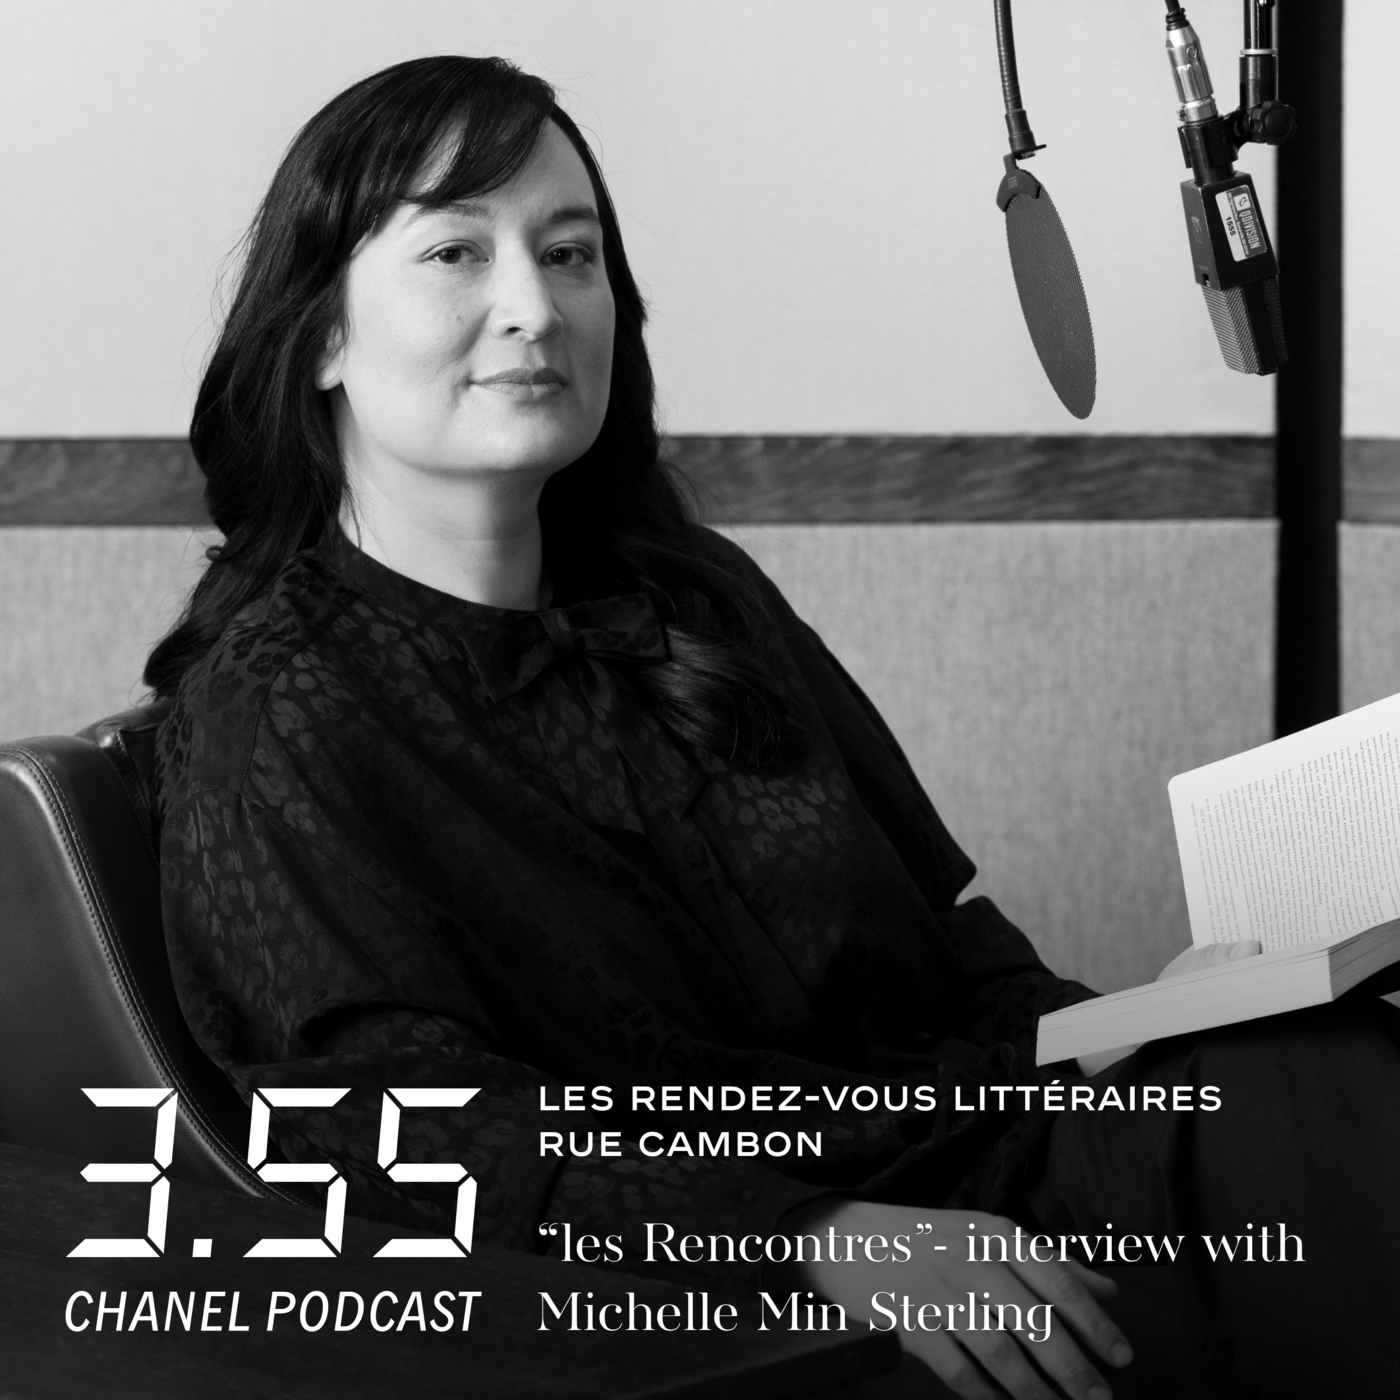 ”les Rencontres” - interview with Michelle Min Sterling